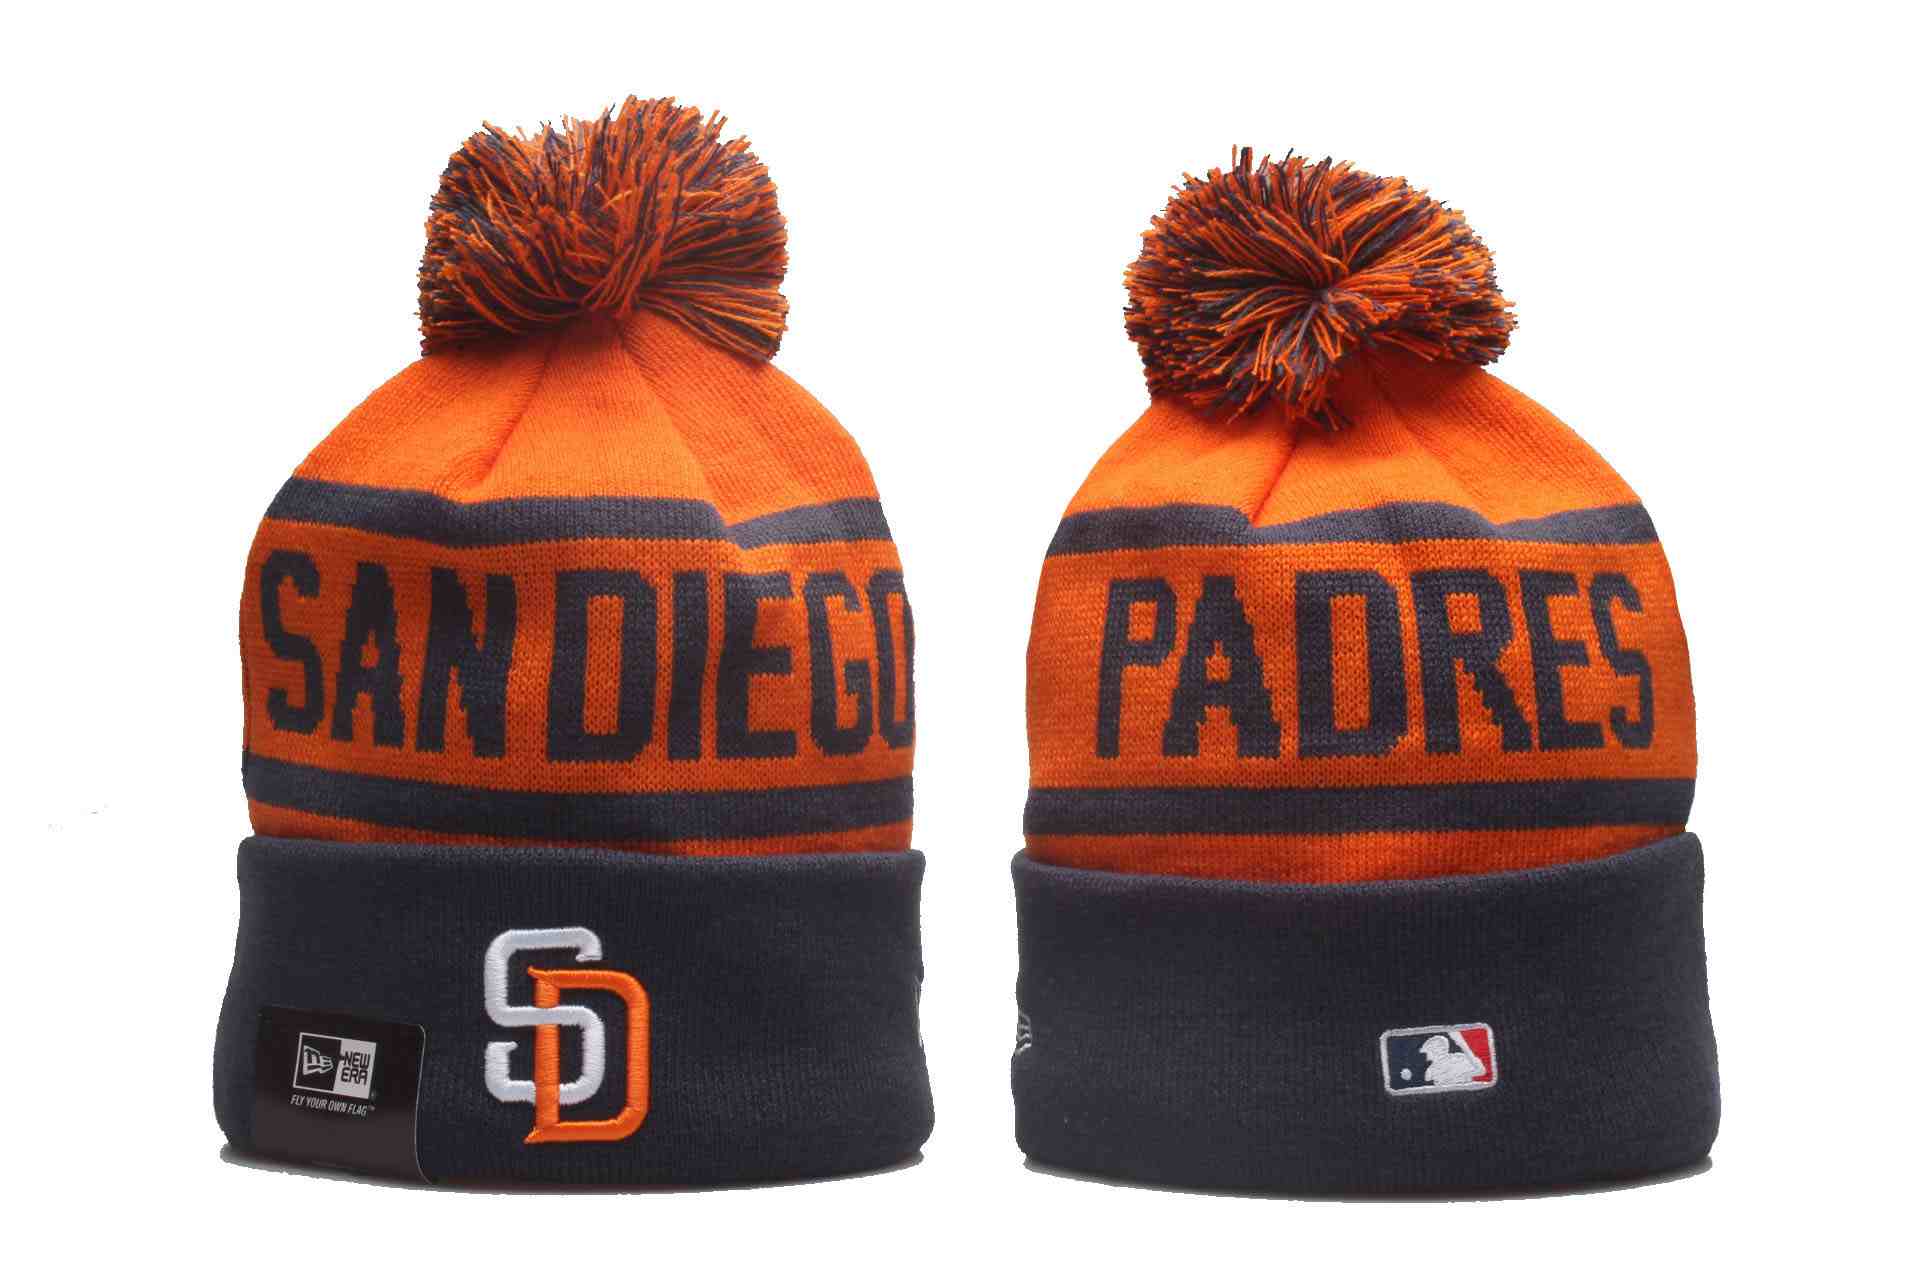 San diego Padres knit hat YP